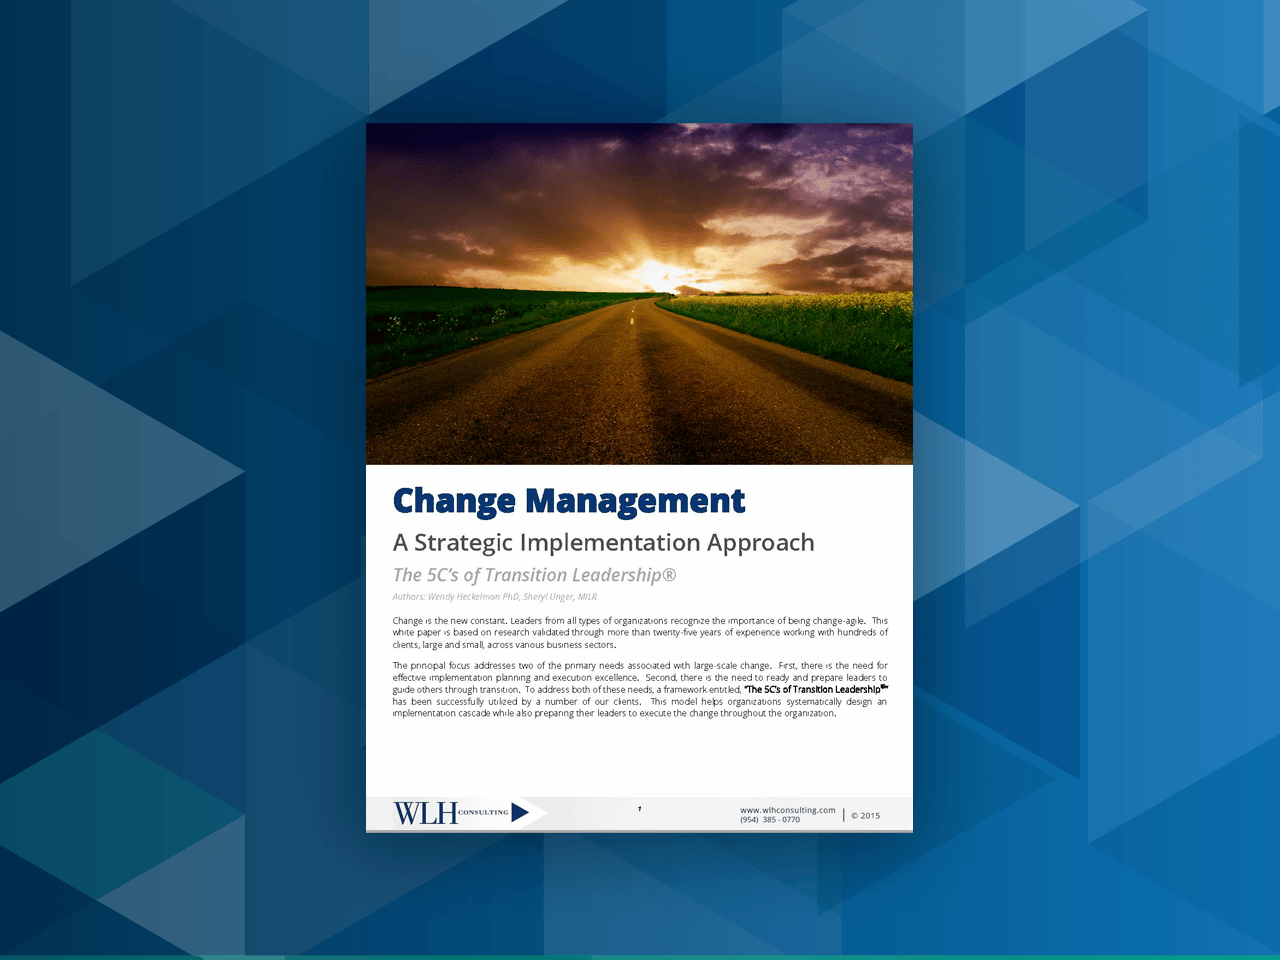 Change Management, A Strategic Implementation Approach: The 5C’s of Transition Leadership®